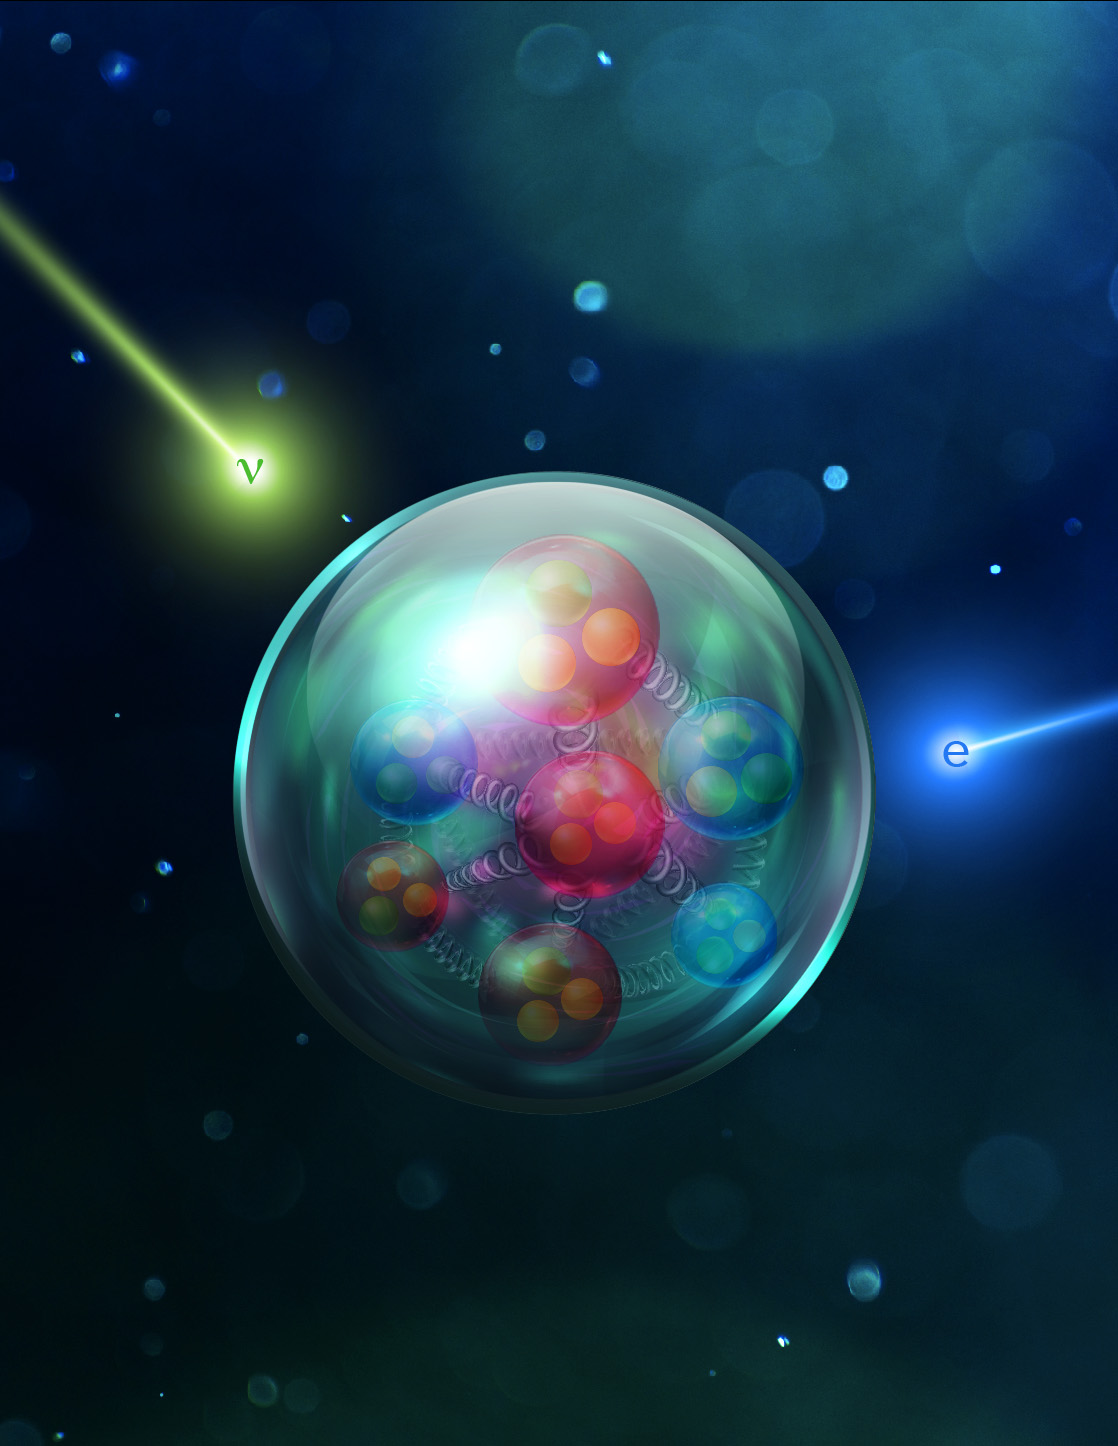 neutrinos and electrons interact with nuclei